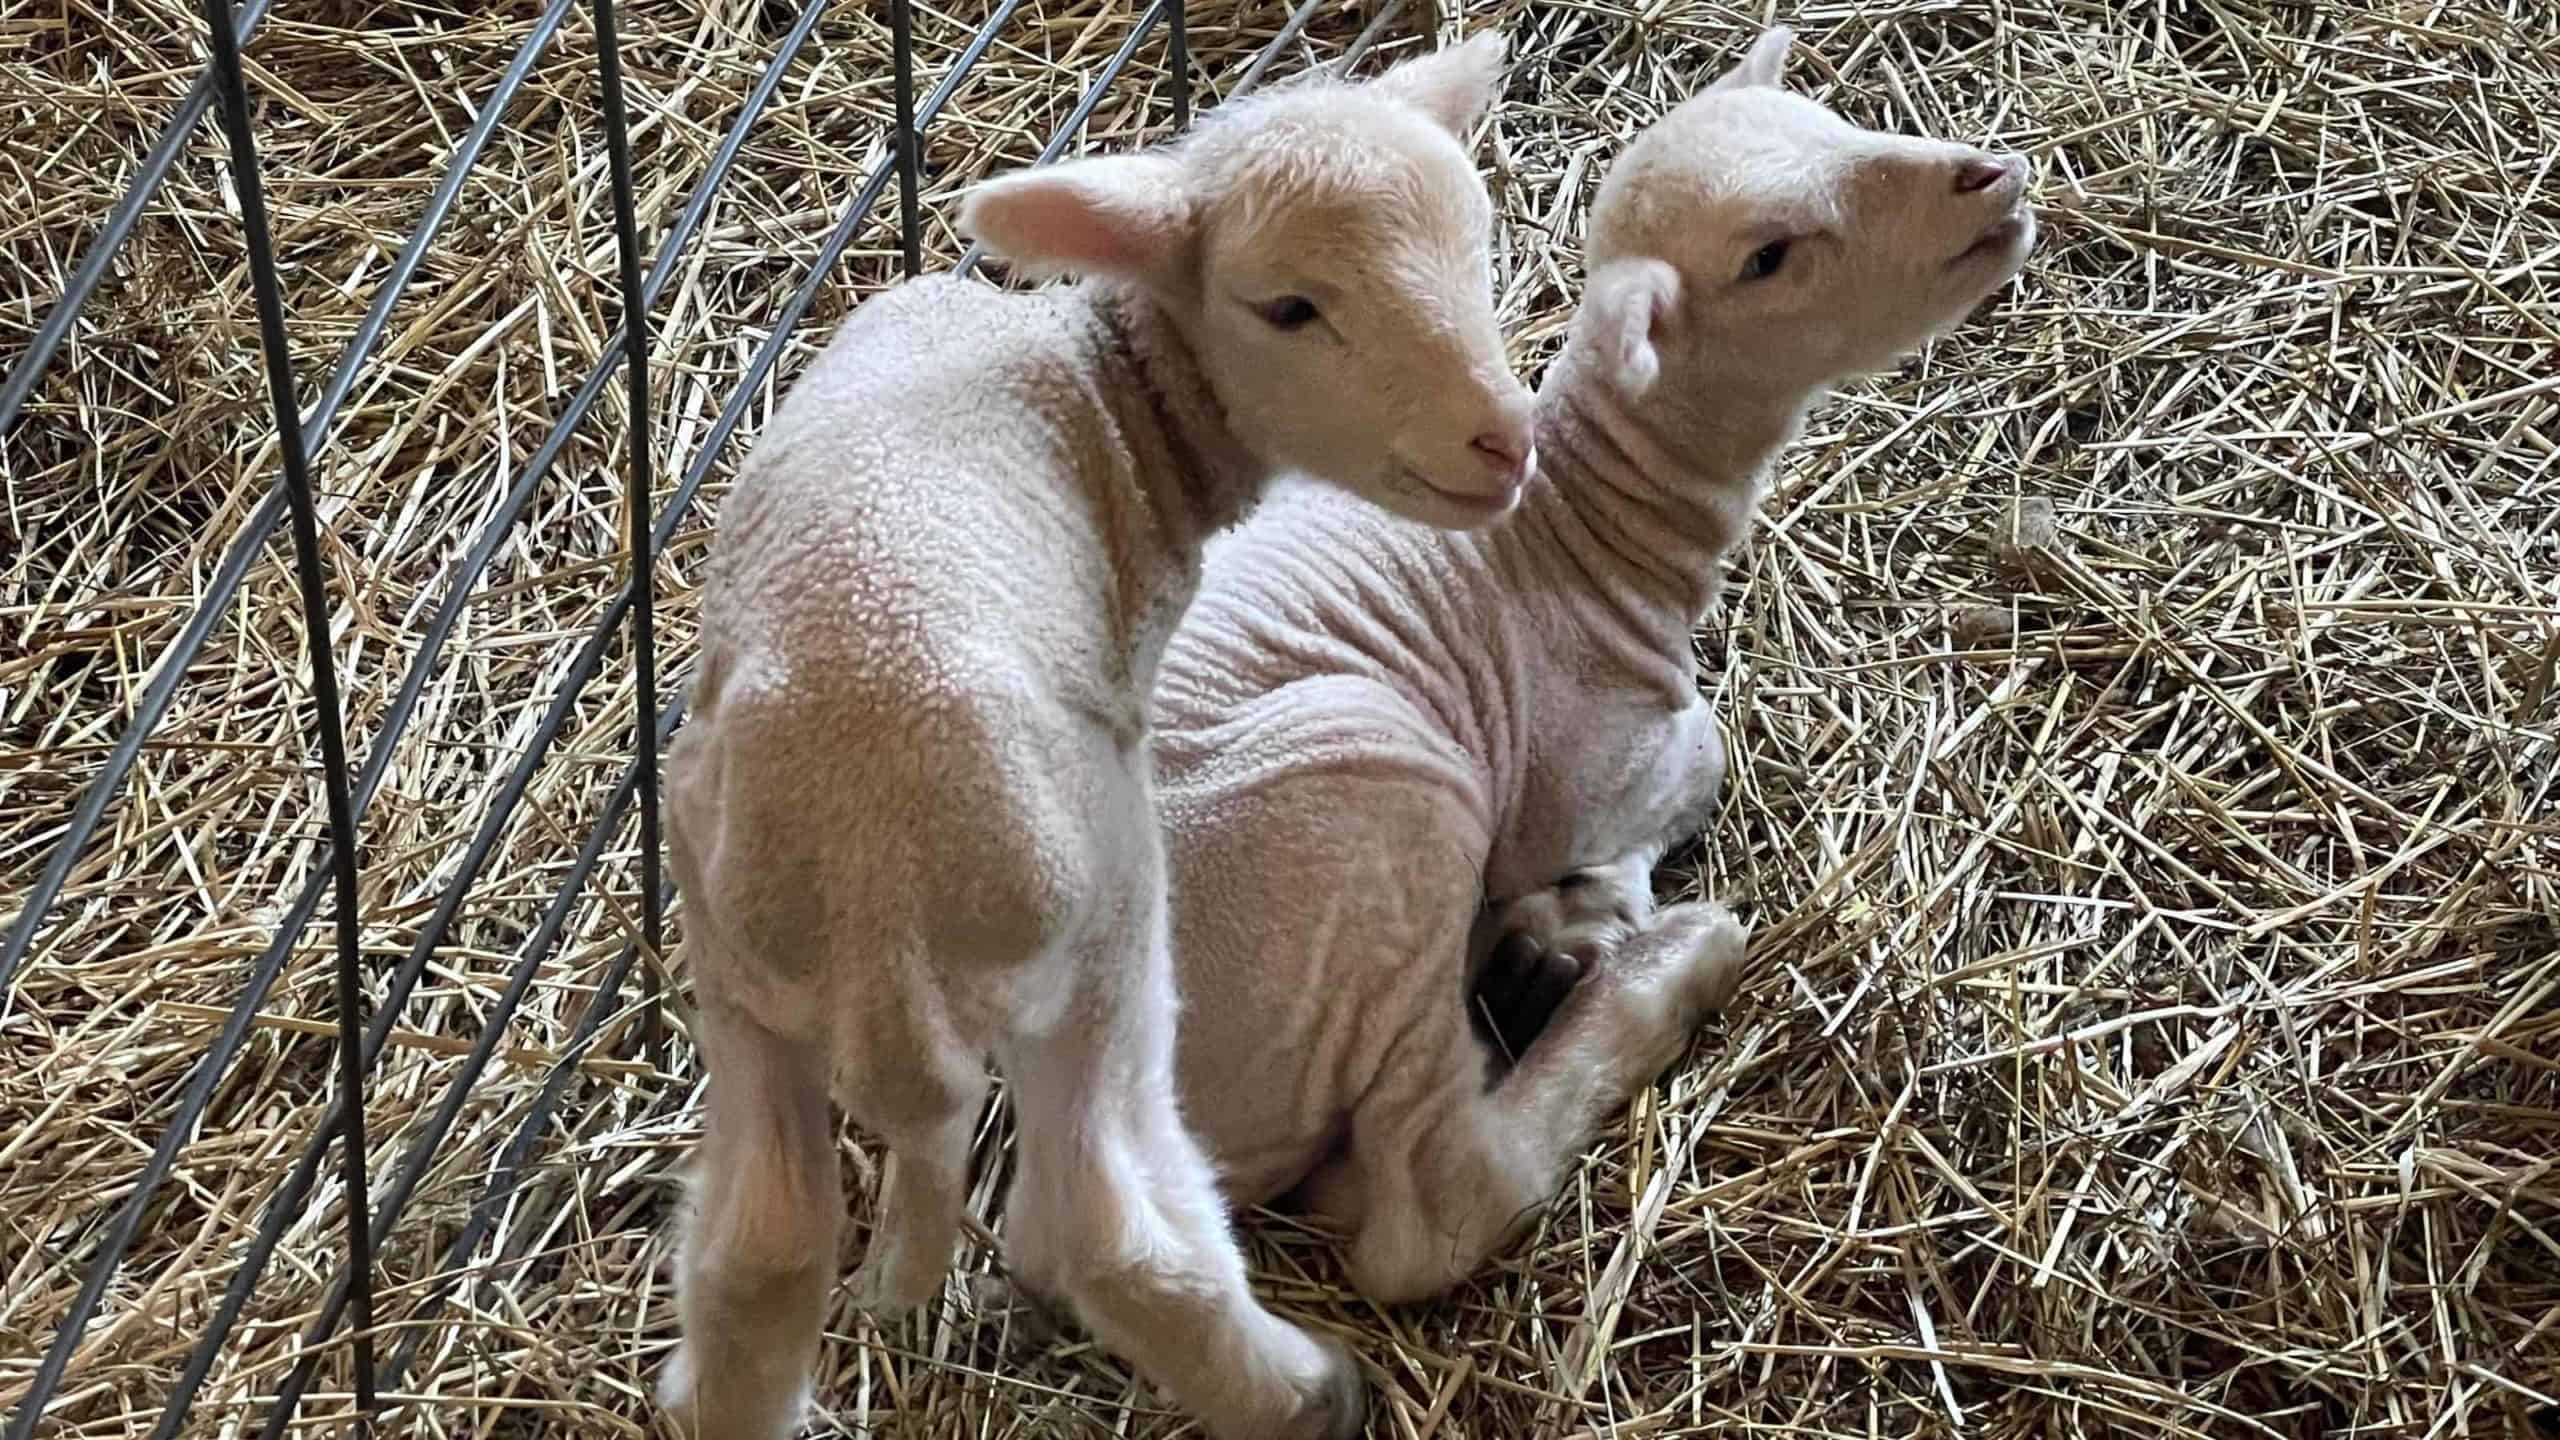 Young lambs curl up together at Hancock Shaker Village.